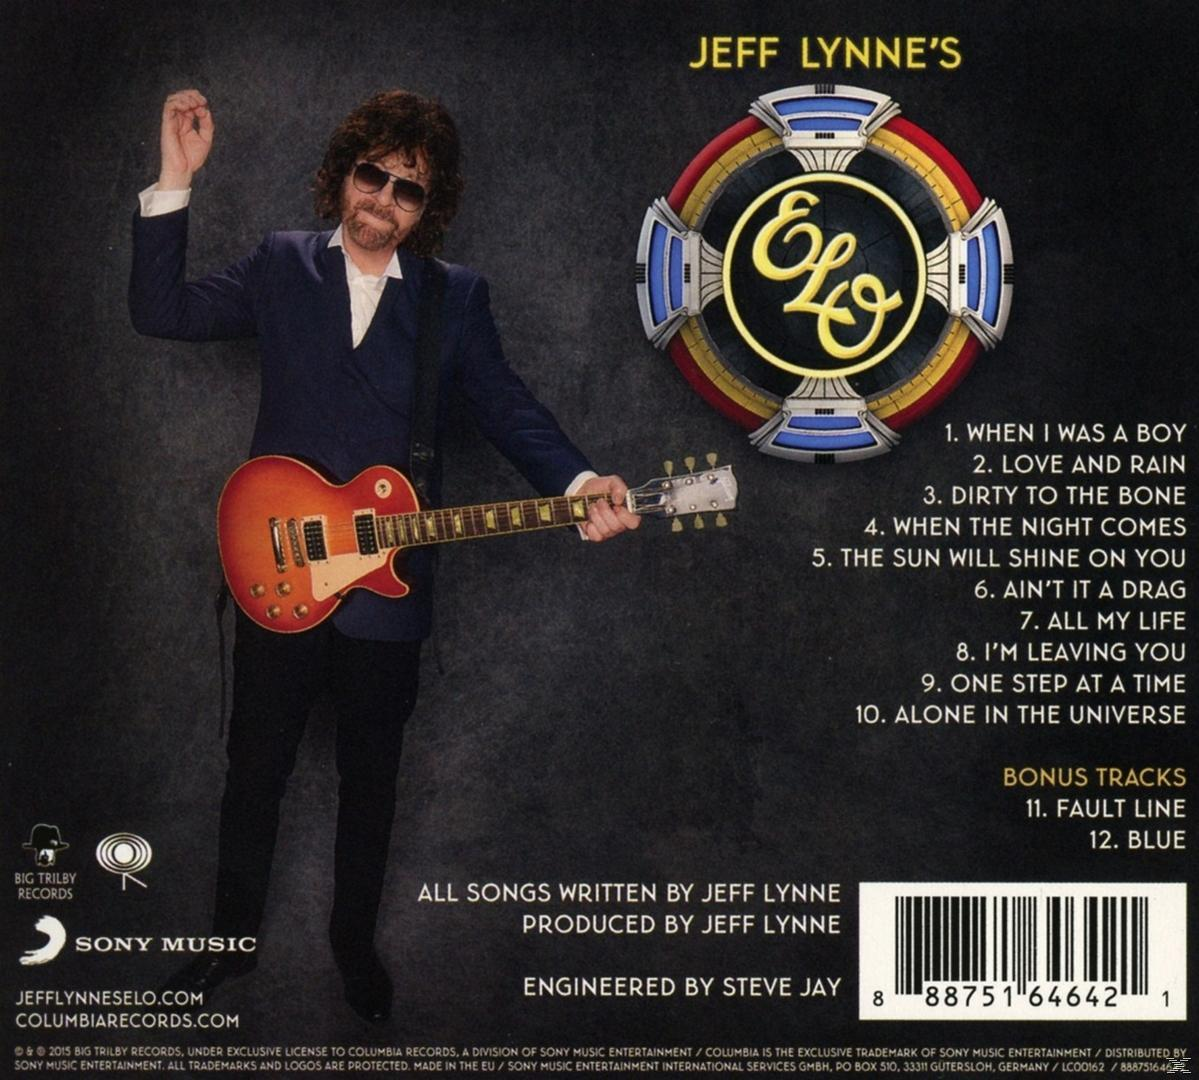 Jeff the ELO-Alone in - Lynne\'s Lynnes\'s - Jeff Orchestra Universe Electric Light (CD)